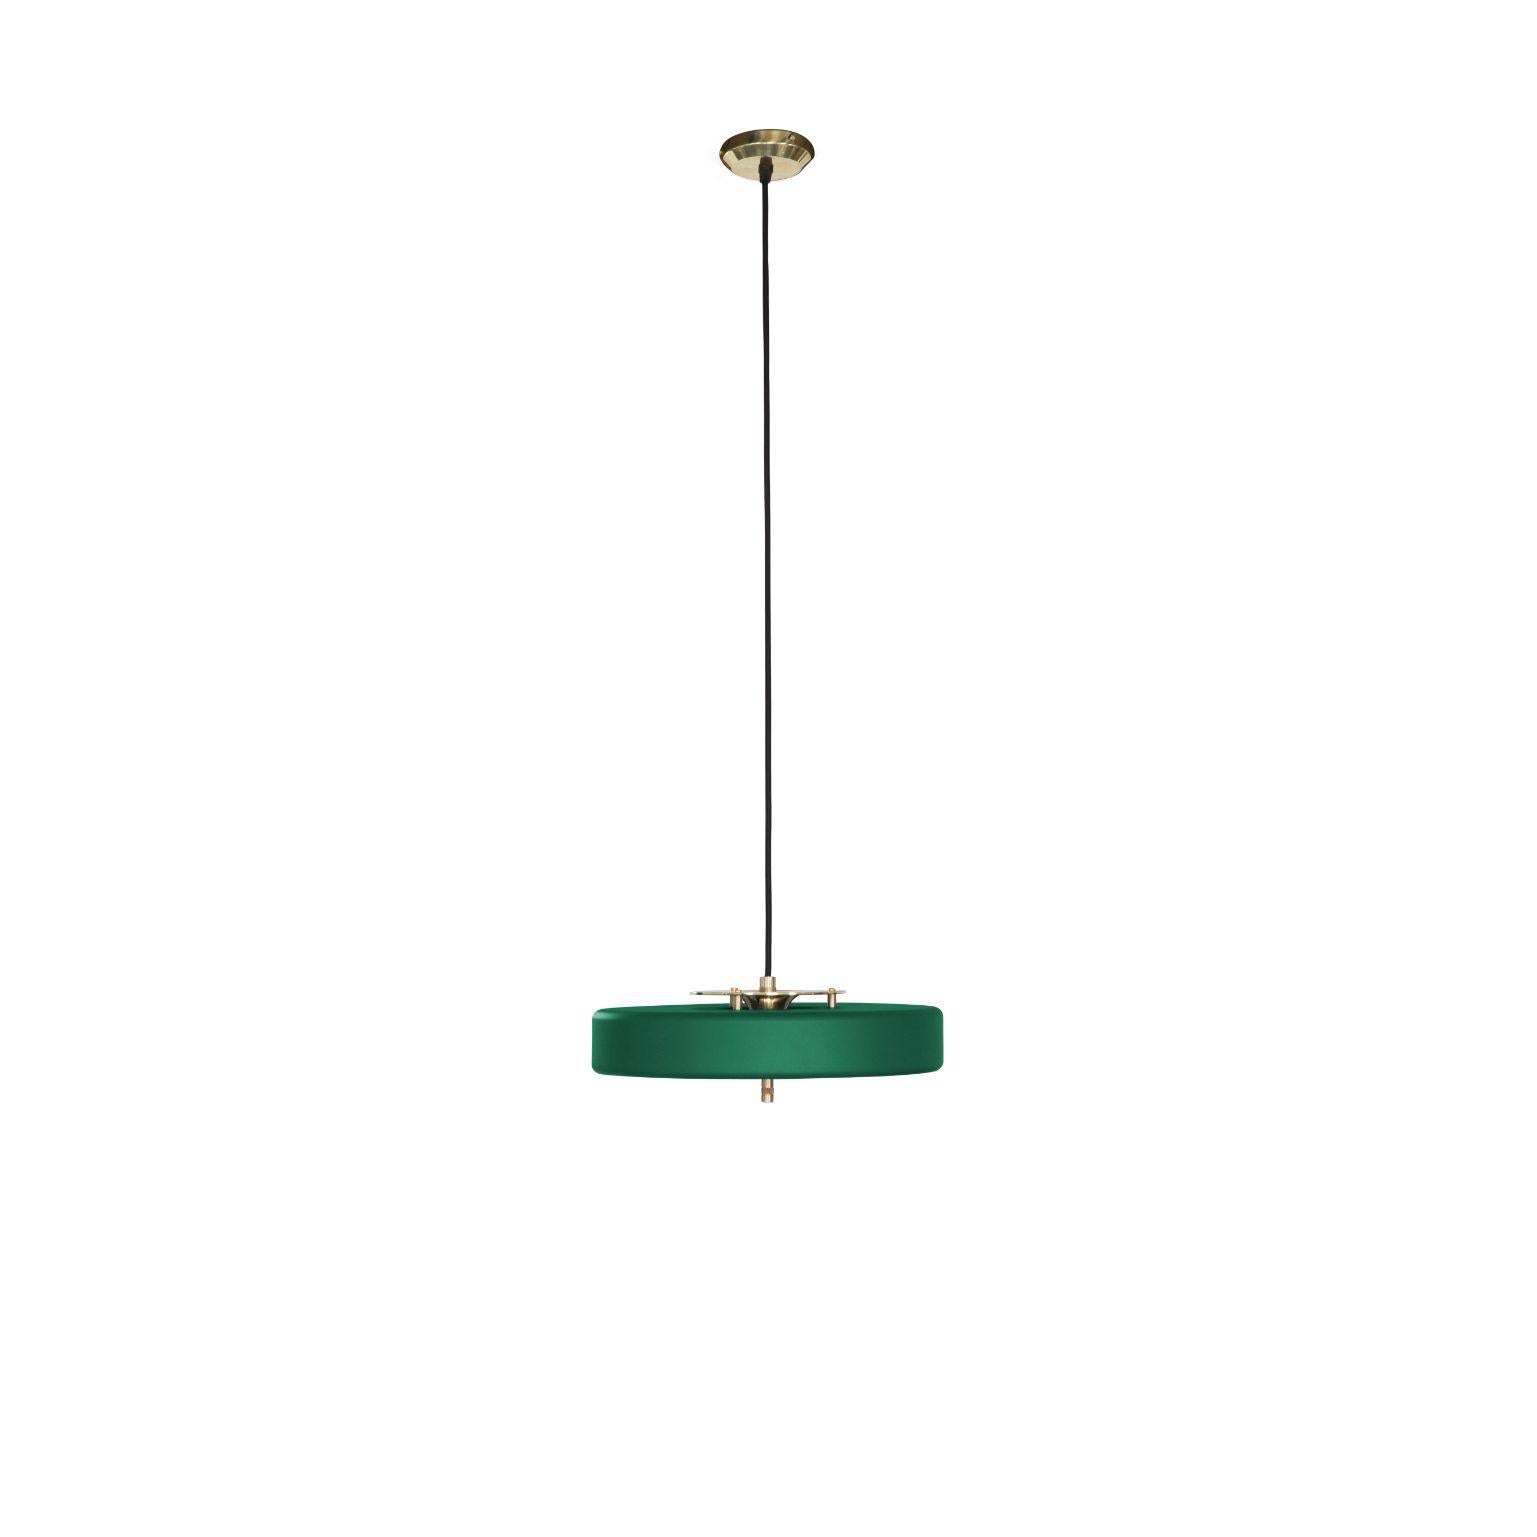 Revolve pendant light - polished brass - green by Bert Frank
Dimensions: 60-200 x 35 x 11 cm
Materials: Brass, steel

Also available in brushed brass

When Adam Yeats and Robbie Llewellyn founded Bert Frank in 2013 it was a meeting of minds and the